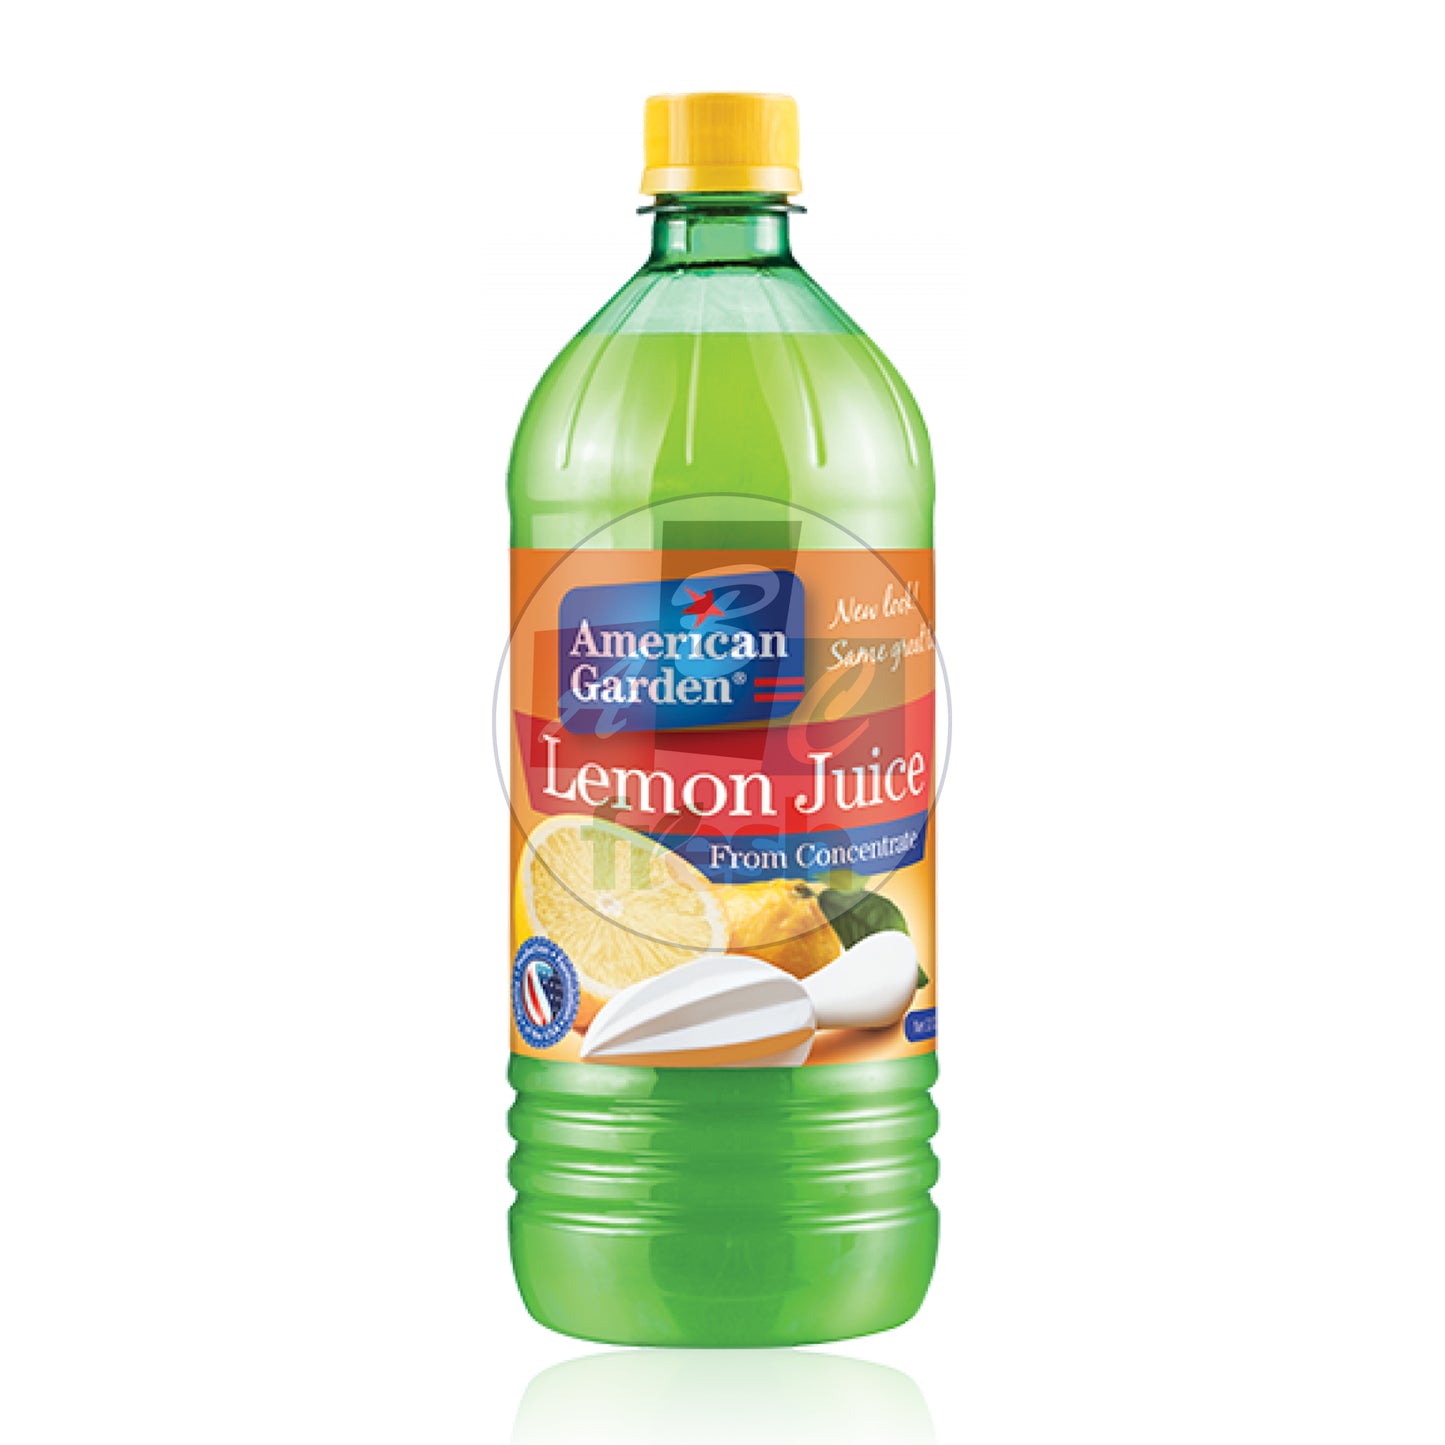 AMERICAN GARDEN LEMON JUICE FROM CONCENTRATE 946ML